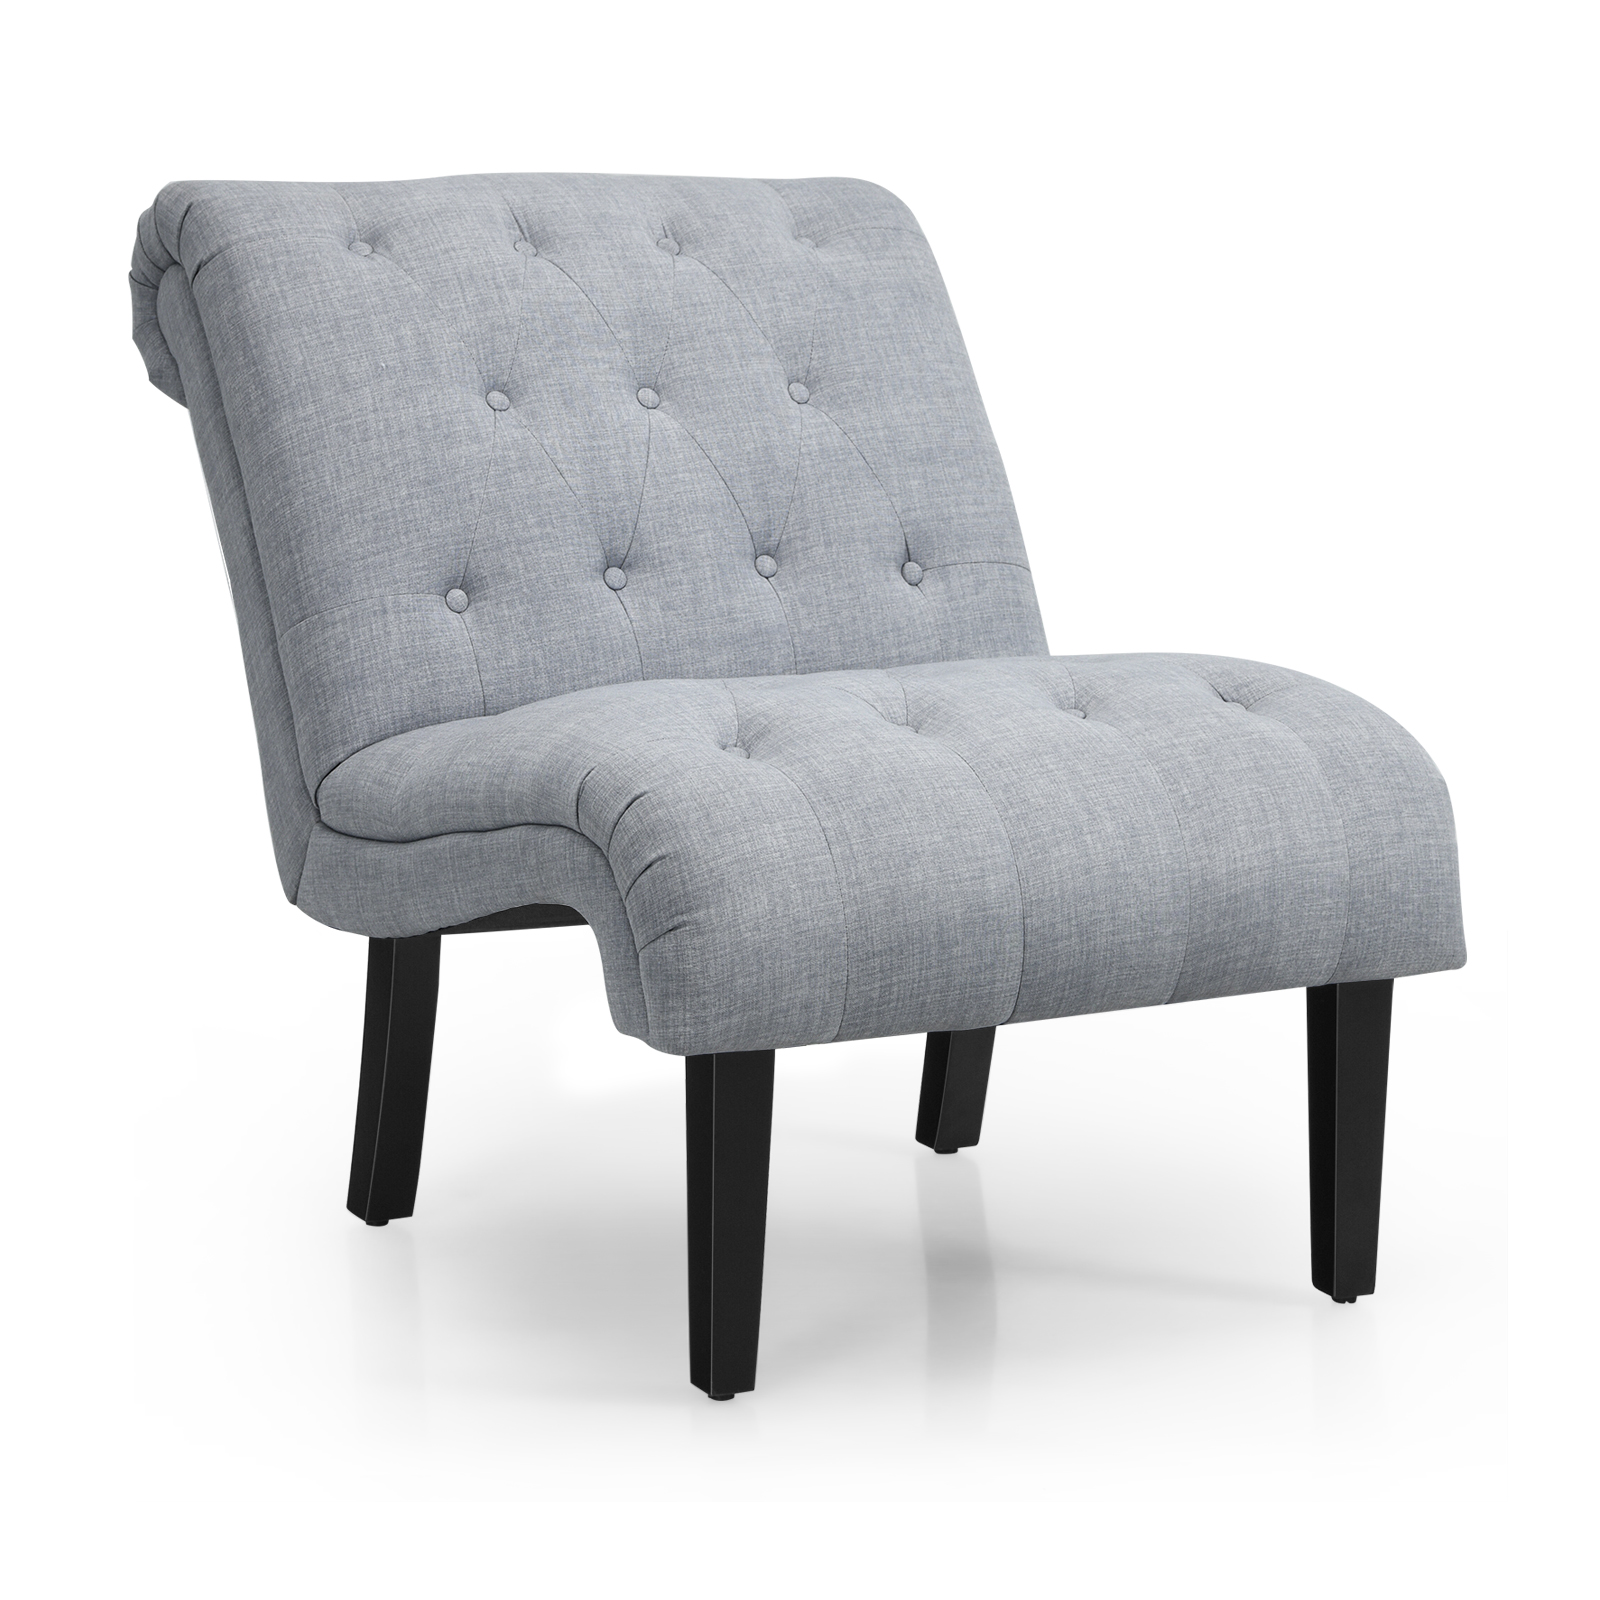 Modern Upholstered Accent Chair with Button Tufted Linen Fabric-Light Grey